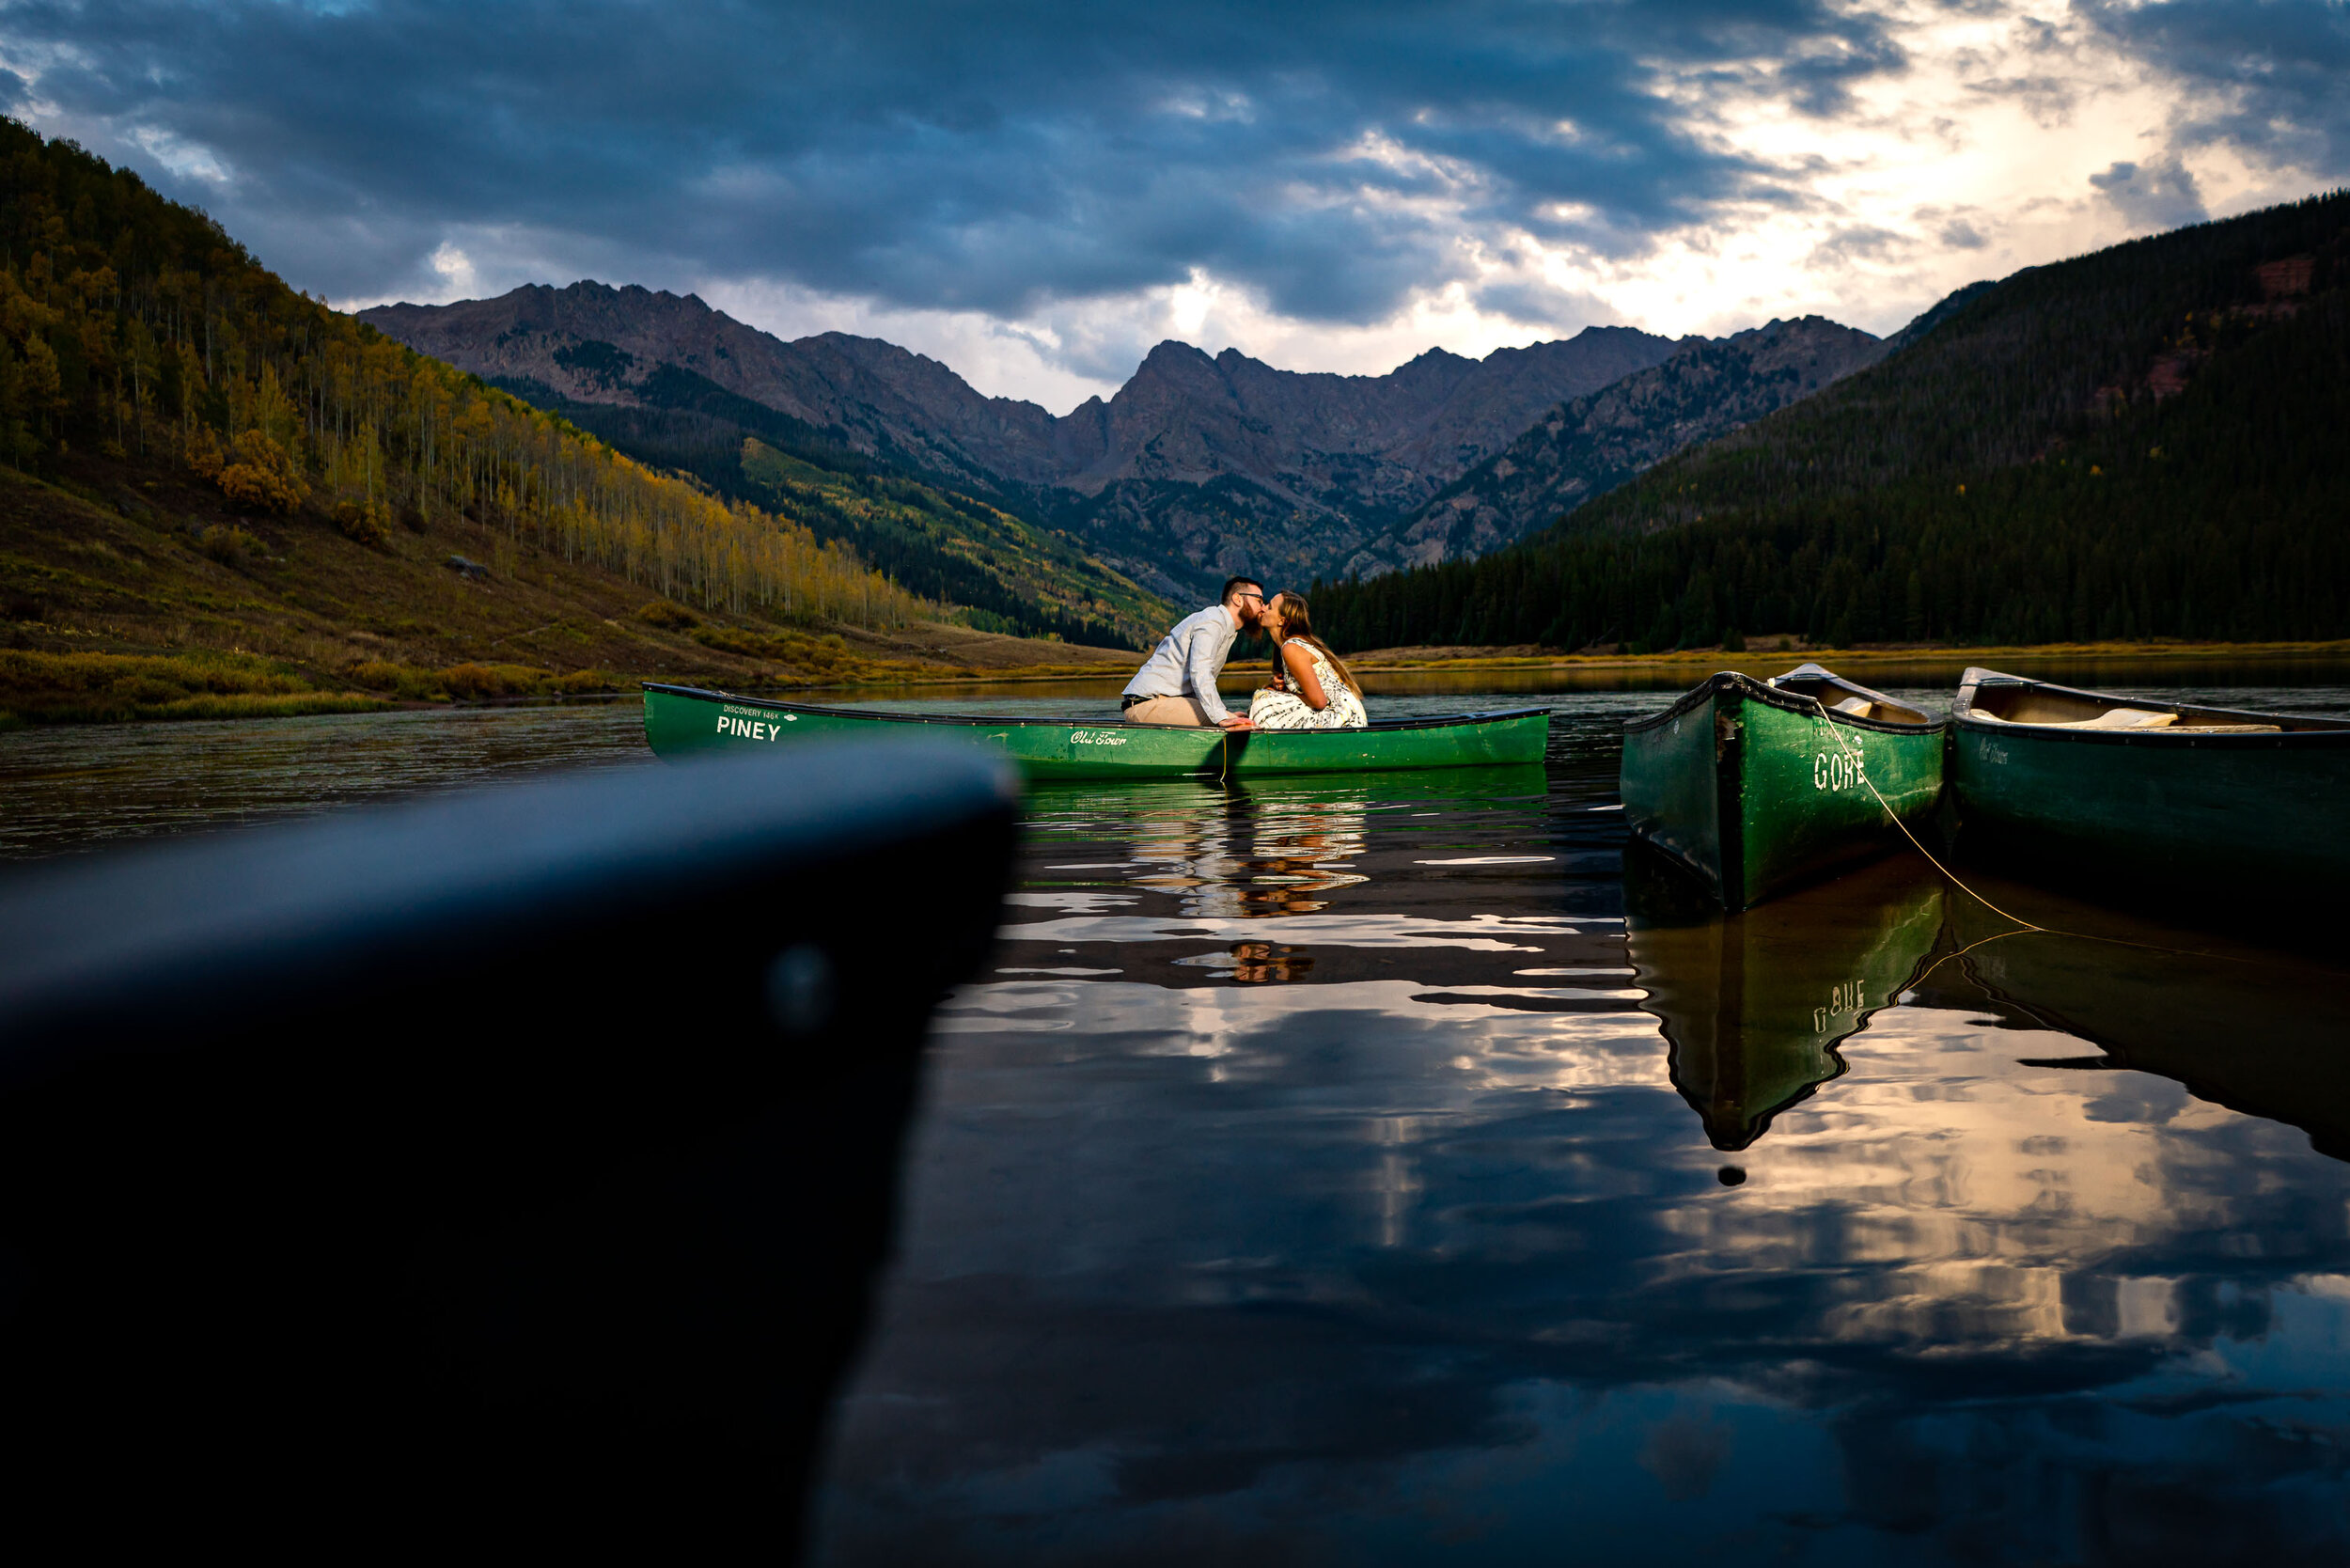 Engaged couple shares a kiss in a canoe on the lake during blue hour surrounded by water with the mountains in the background, Engagement Session, Engagement Photos, Engagement Photos Inspiration, Engagement Photography, Engagement Photographer, Fall Engagement Photos, Mountain Engagement Photos, Piney River Ranch engagement photos, Vail engagement session, Vail engagement photos, Vail engagement photography, Vail engagement photographer, Vail engagement inspiration, Colorado engagement session, Colorado engagement photos, Colorado engagement photography, Colorado engagement photographer, Colorado engagement inspiration